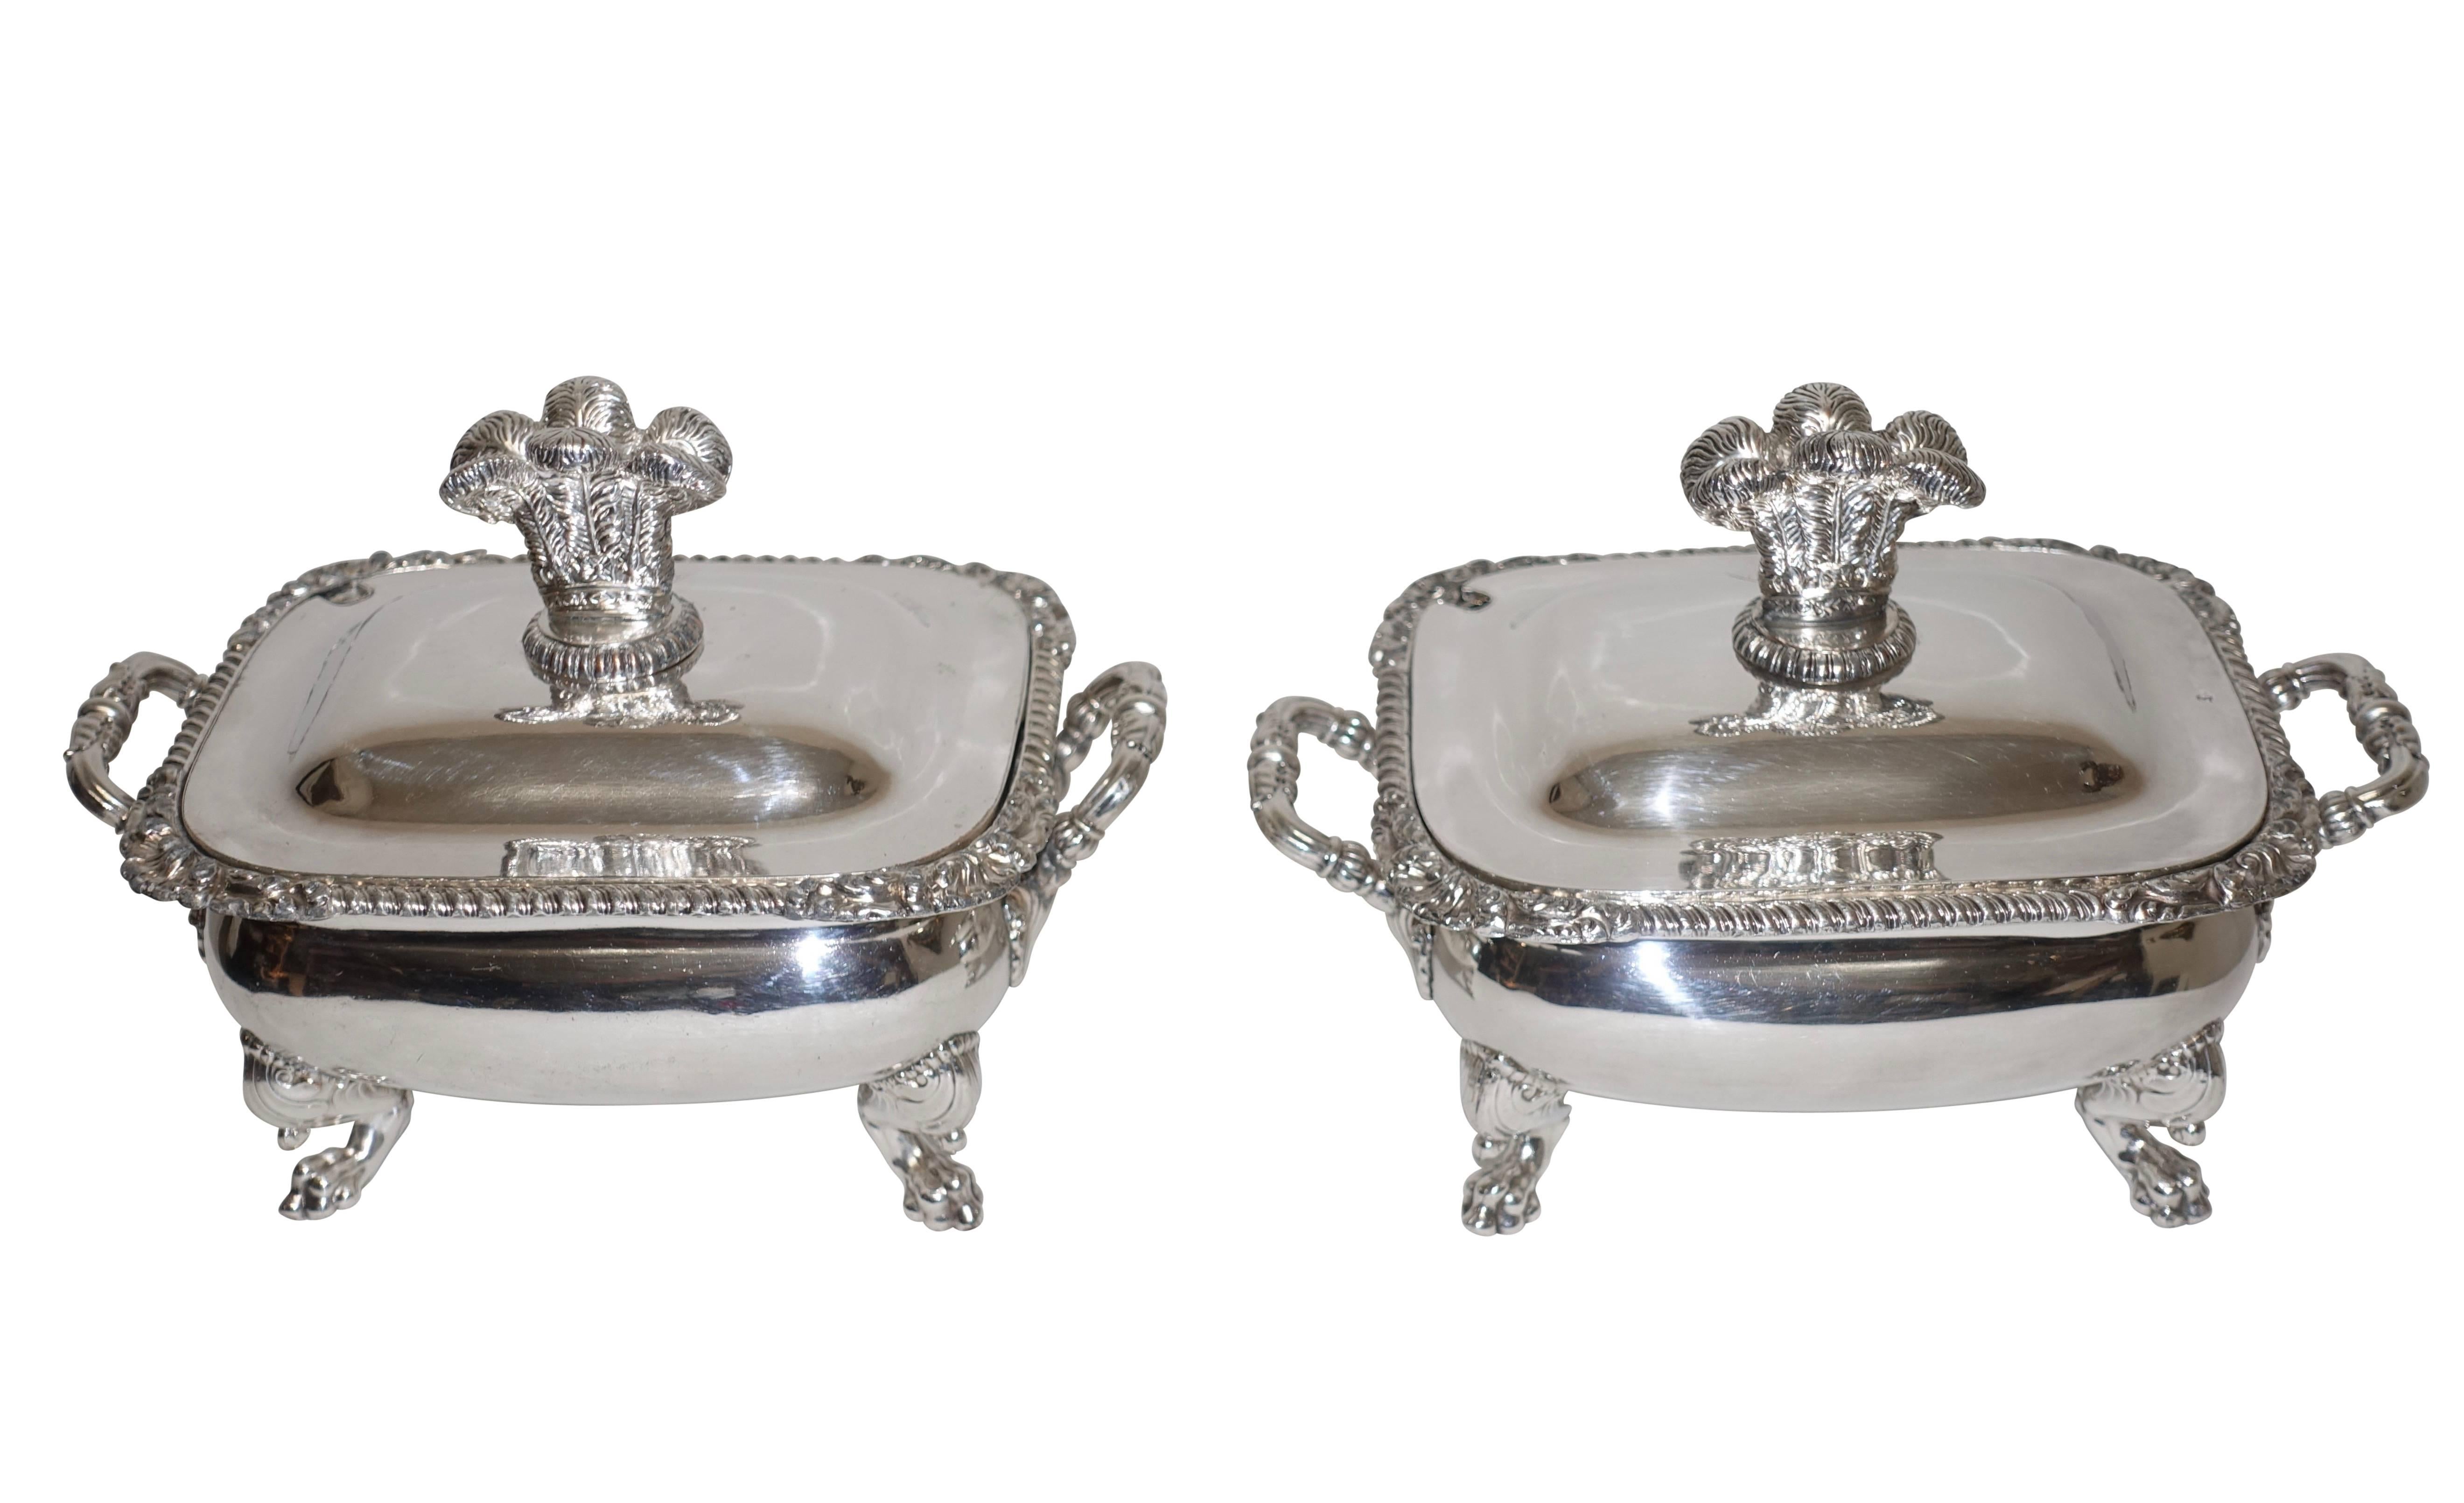 Sheffield Plate Pair of Sheffield Silver Plate Sauce Tureens English, 19th Century